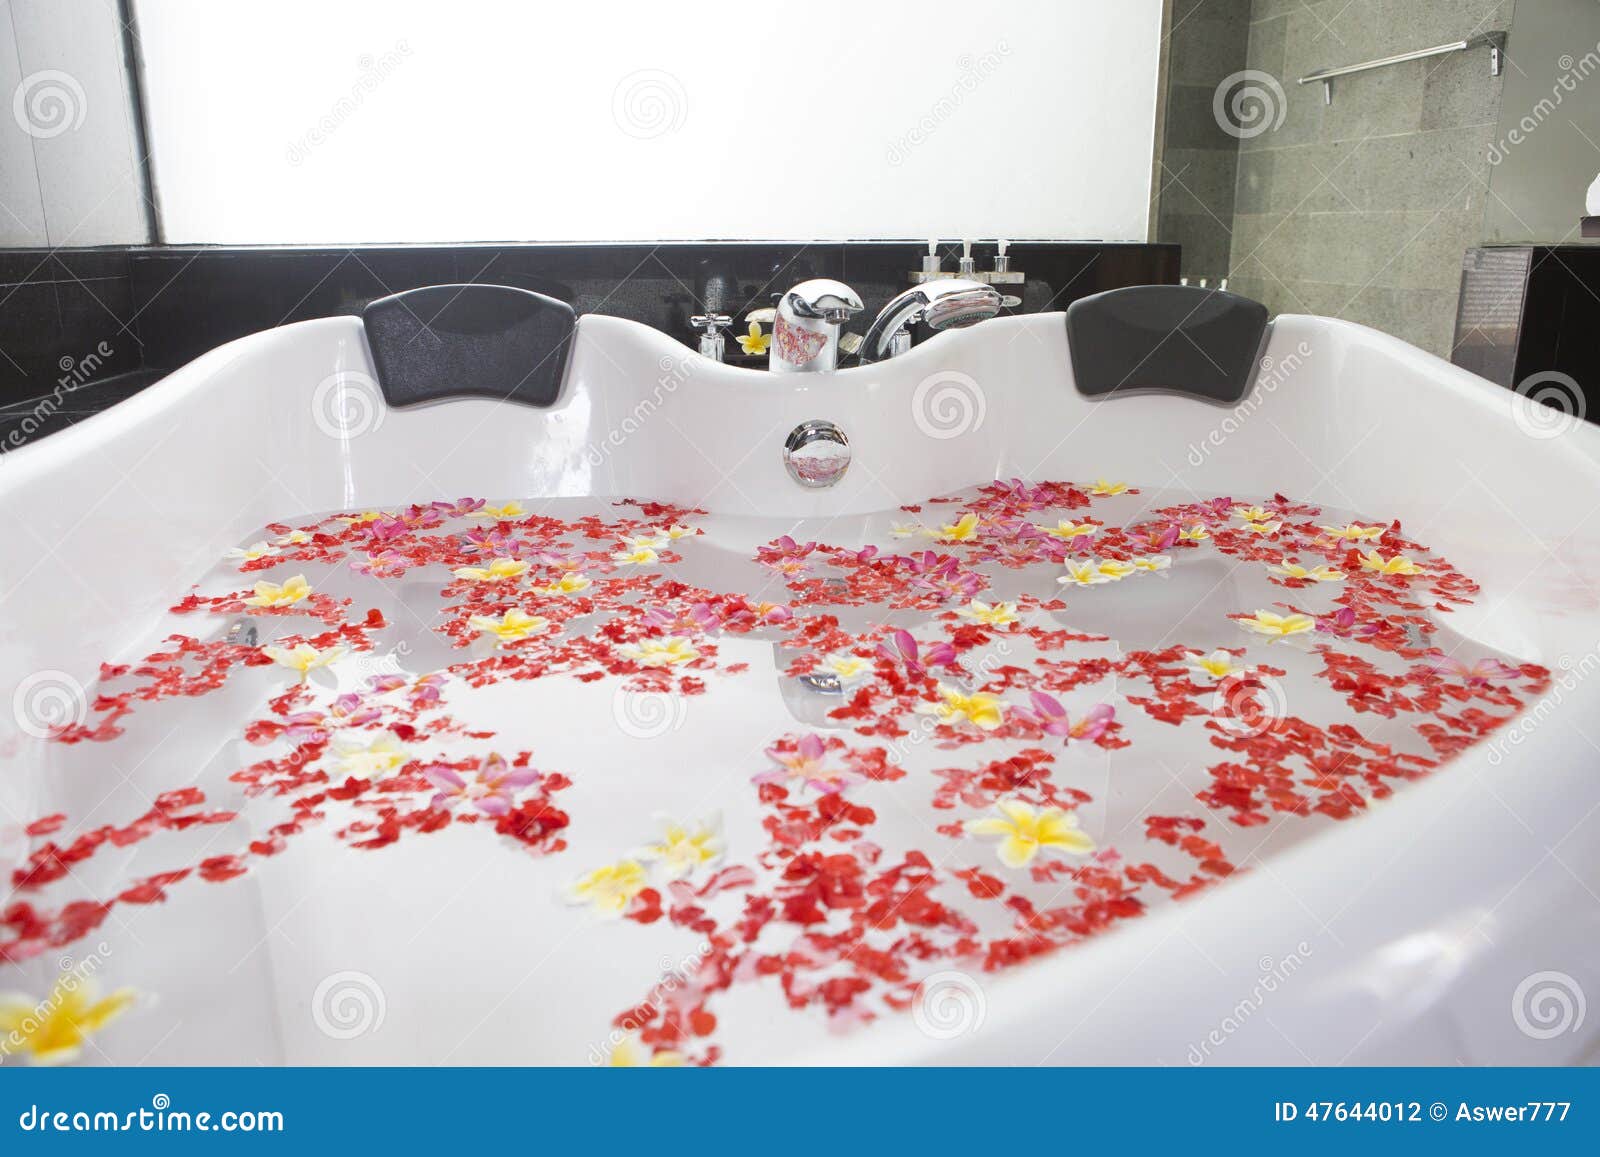 Jacuzzi rose petals in An Electrifying